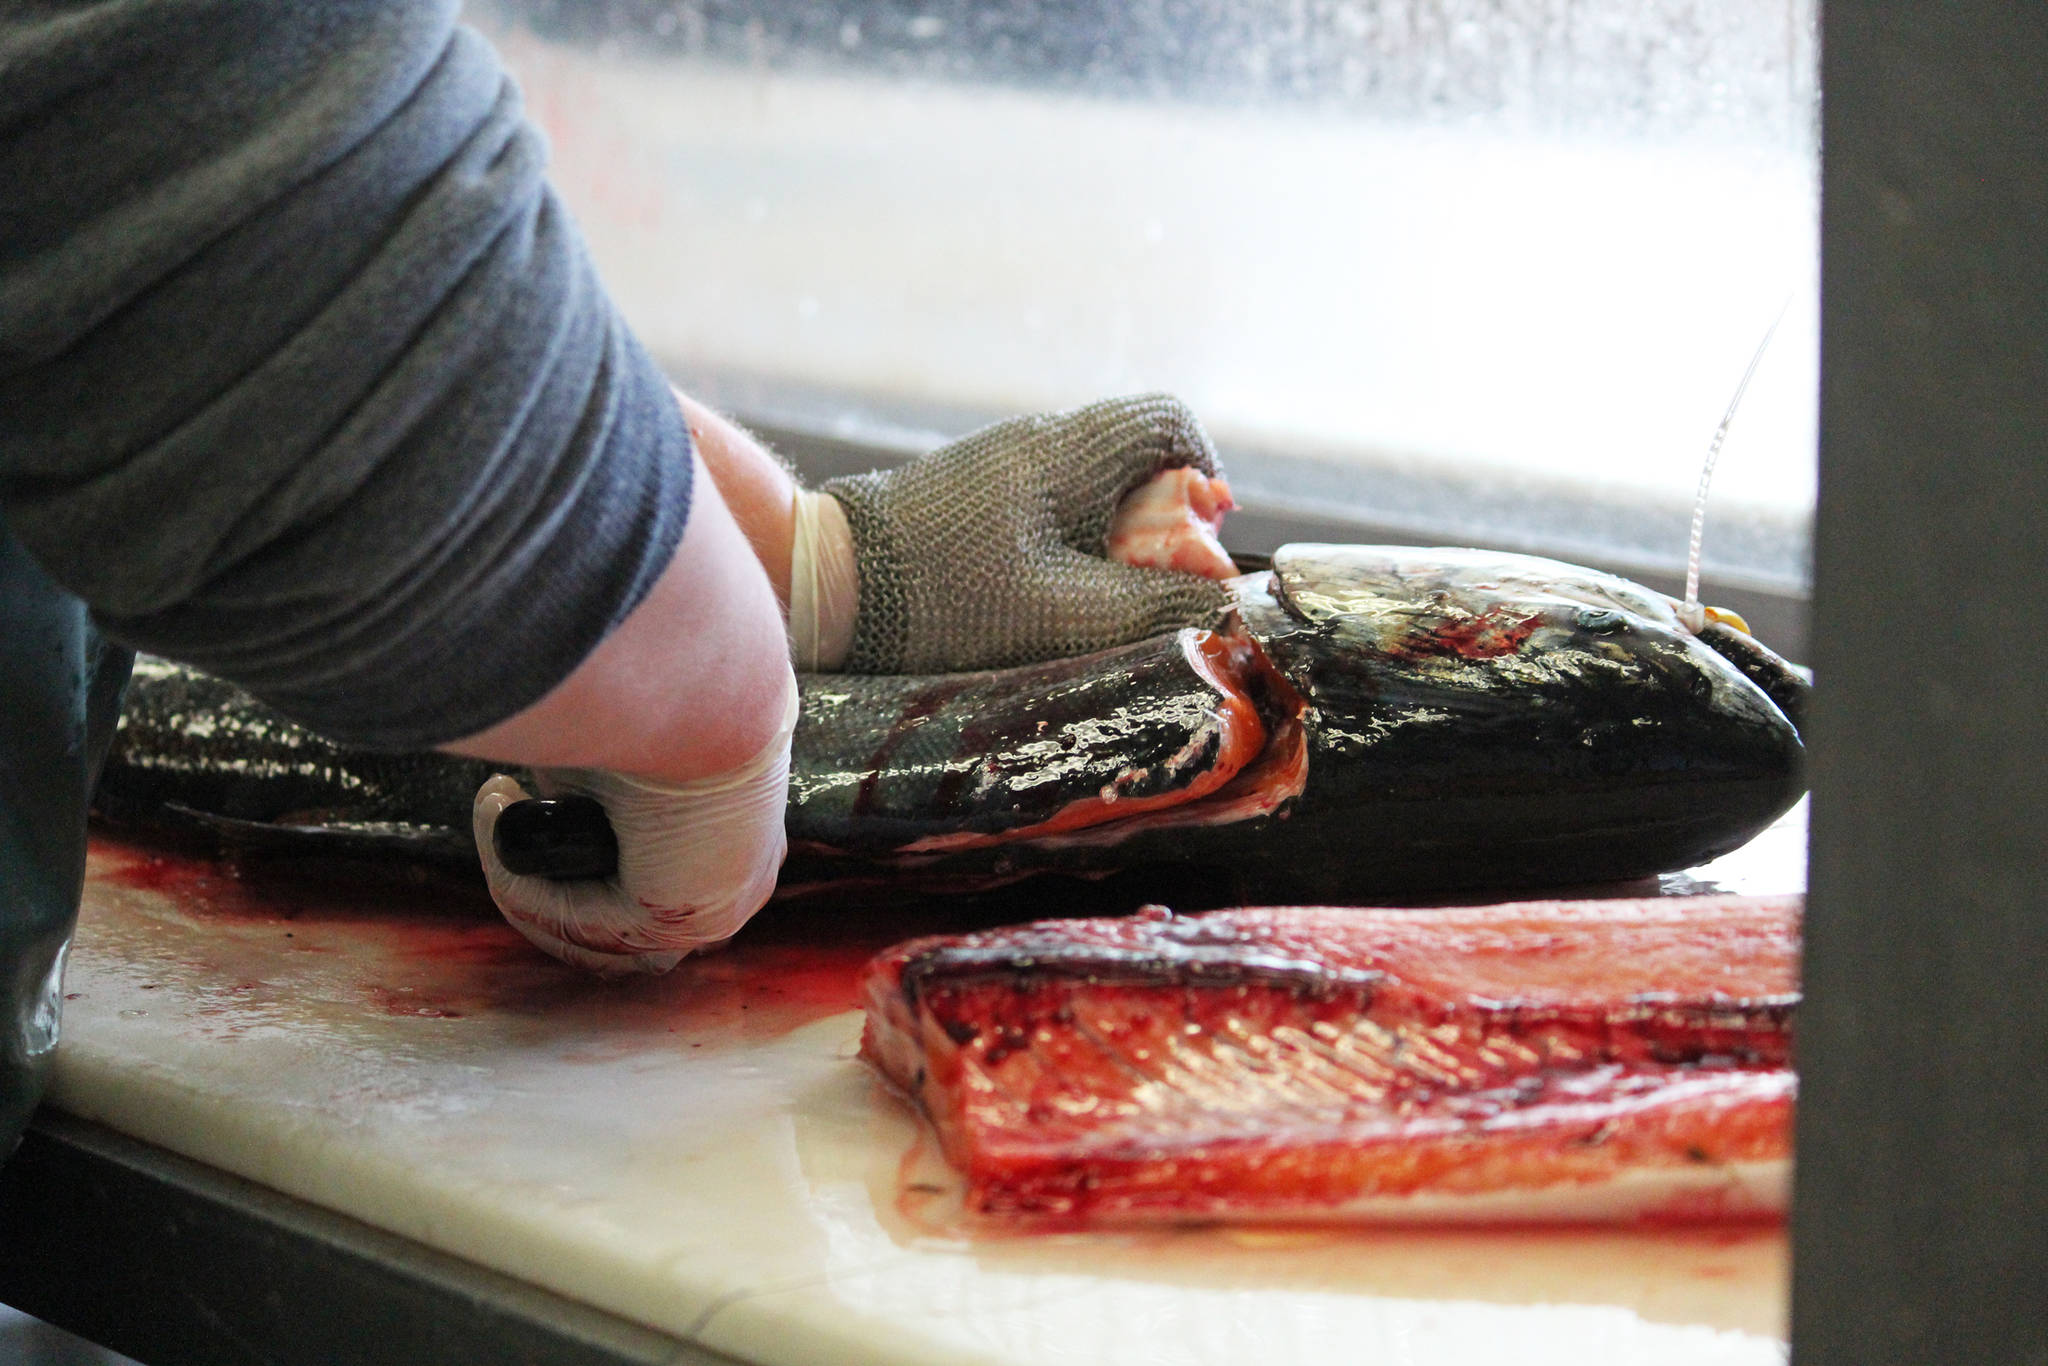 A volunteer fillets a salmon during the Homer Winter King Salmon Tournament at Coal Point Seafoods on Saturday, March 23, 2019 in Homer, Alaska. (Photo by Megan Pacer/Homer News)